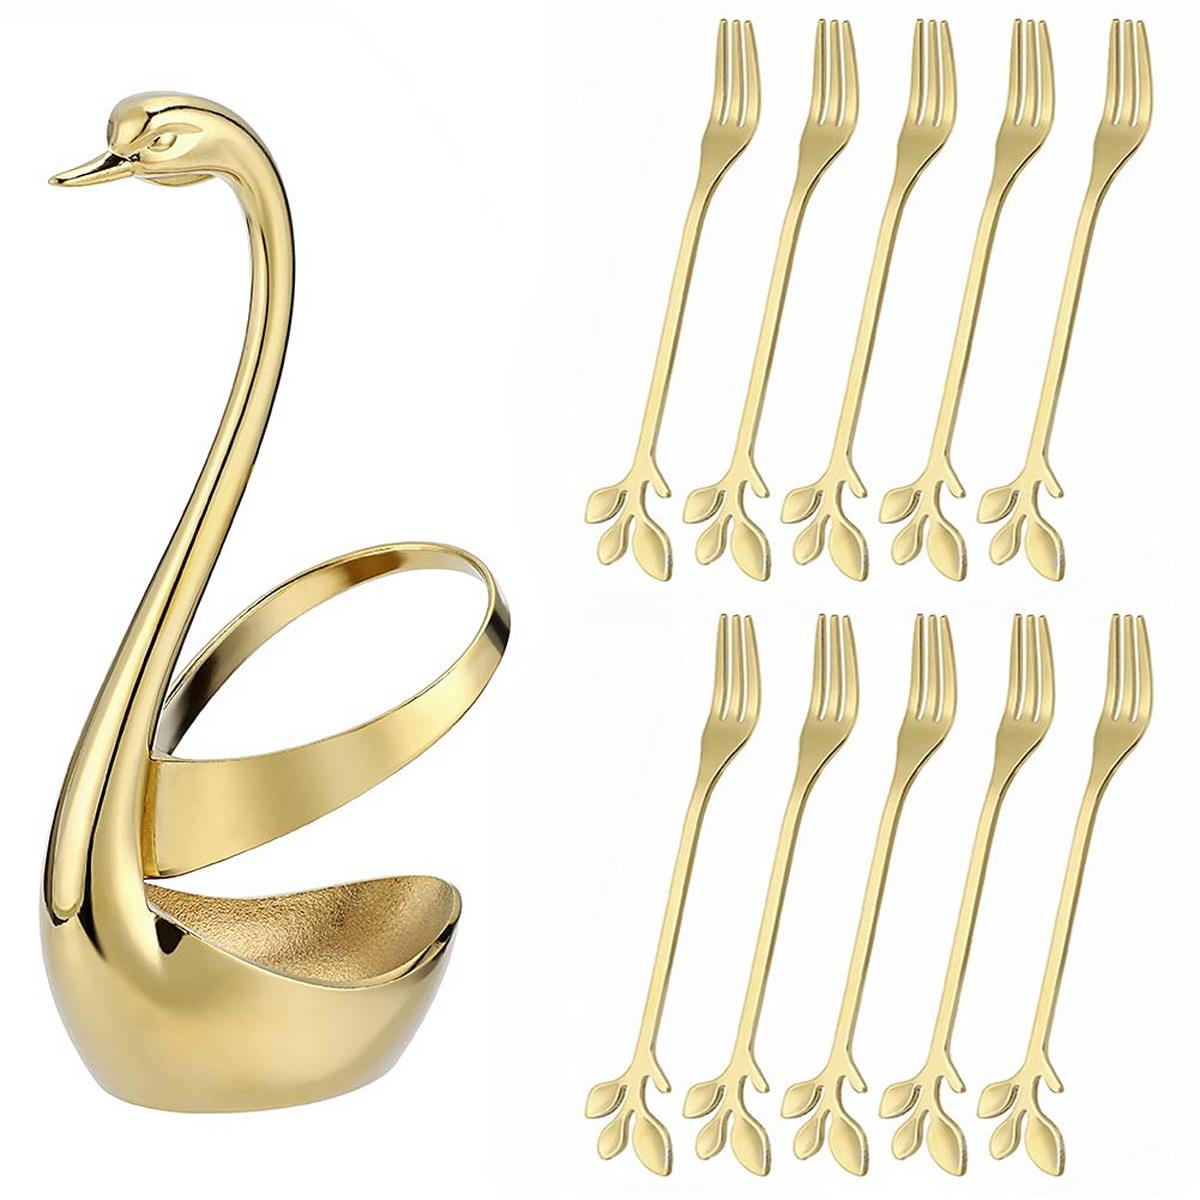 Swan Base Holder with Forks and Spoons